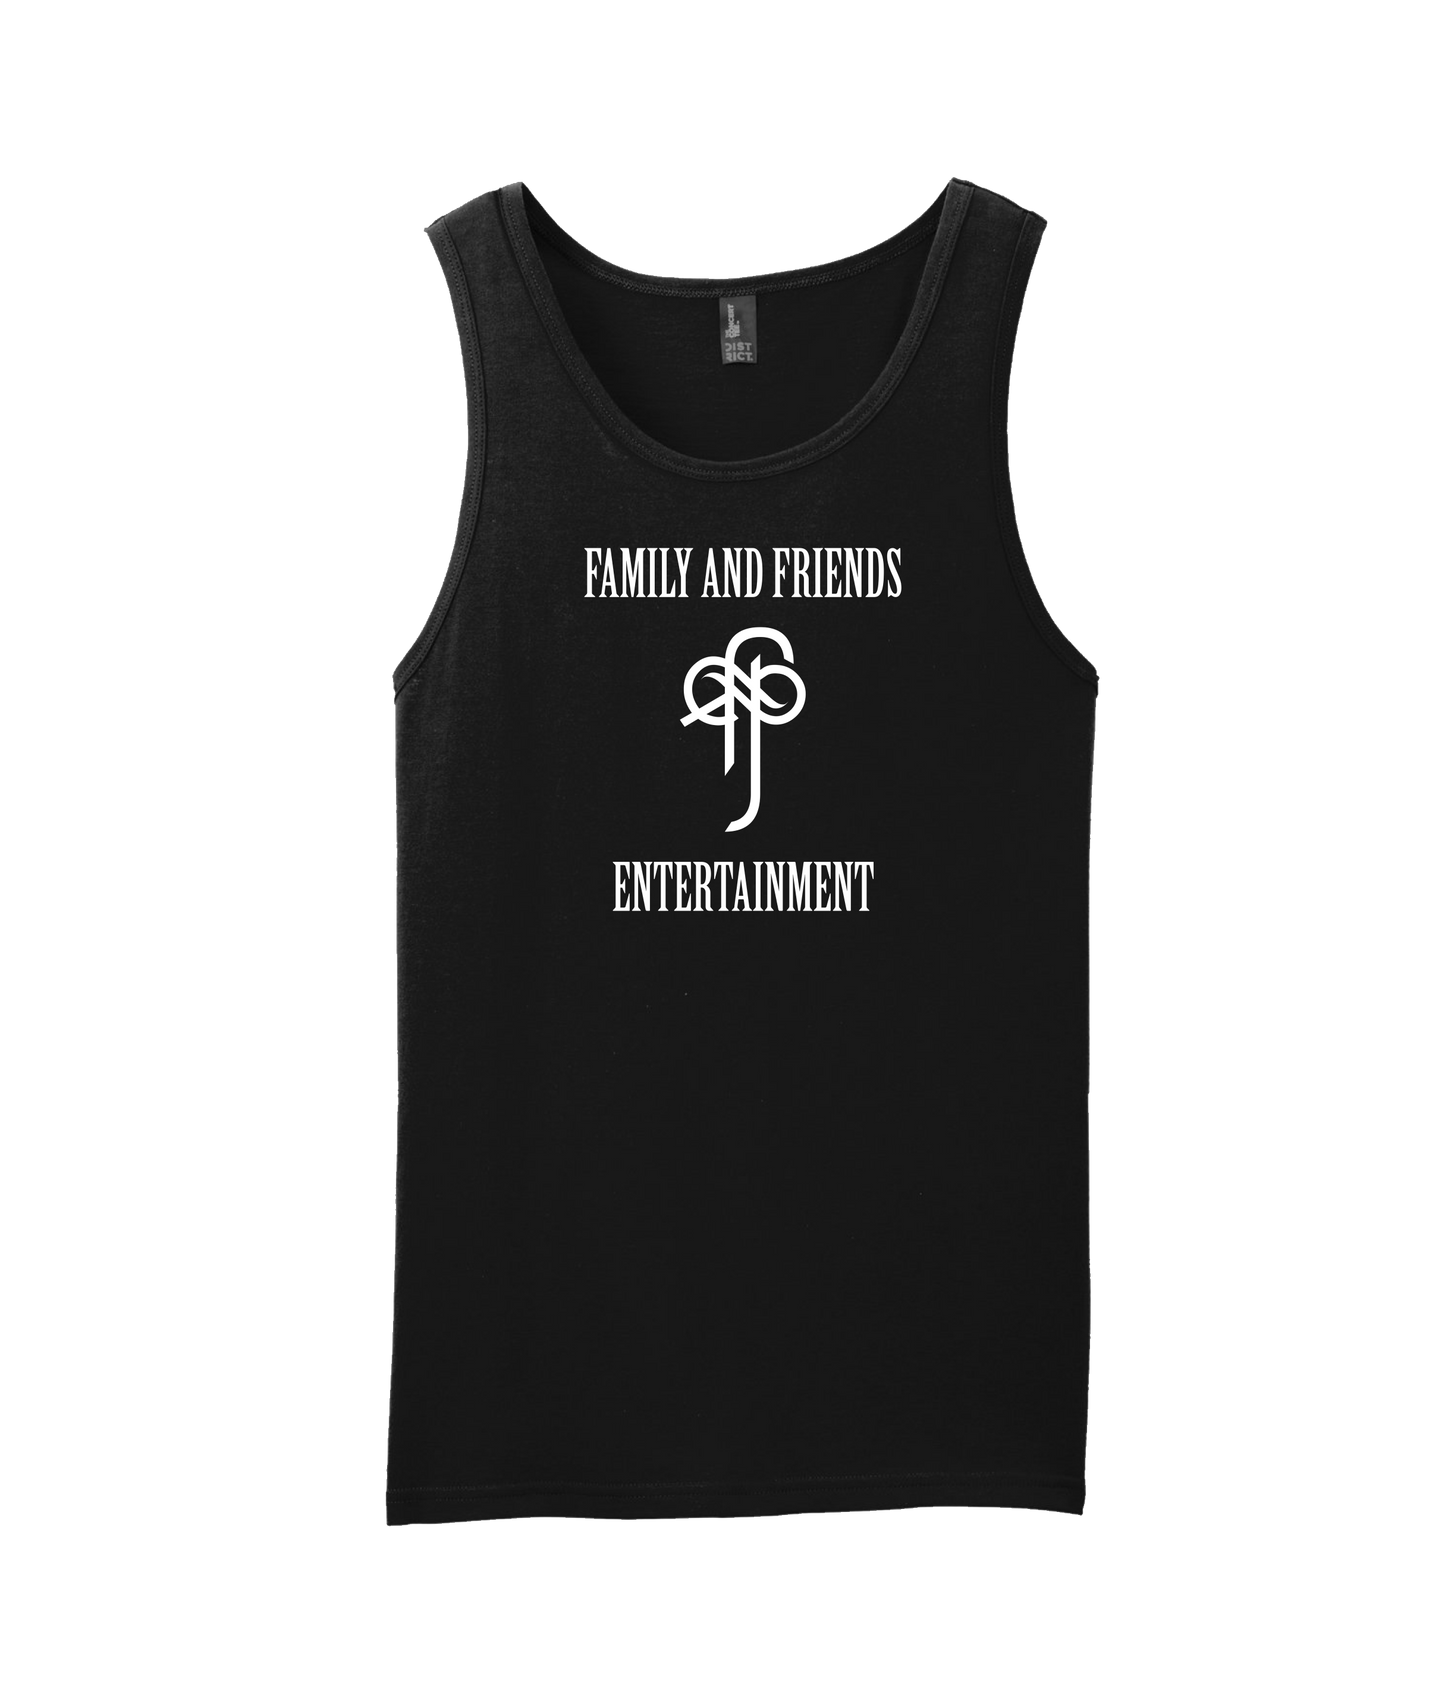 Sincrawford - Family and Friends Ent.  - Black Tank Top